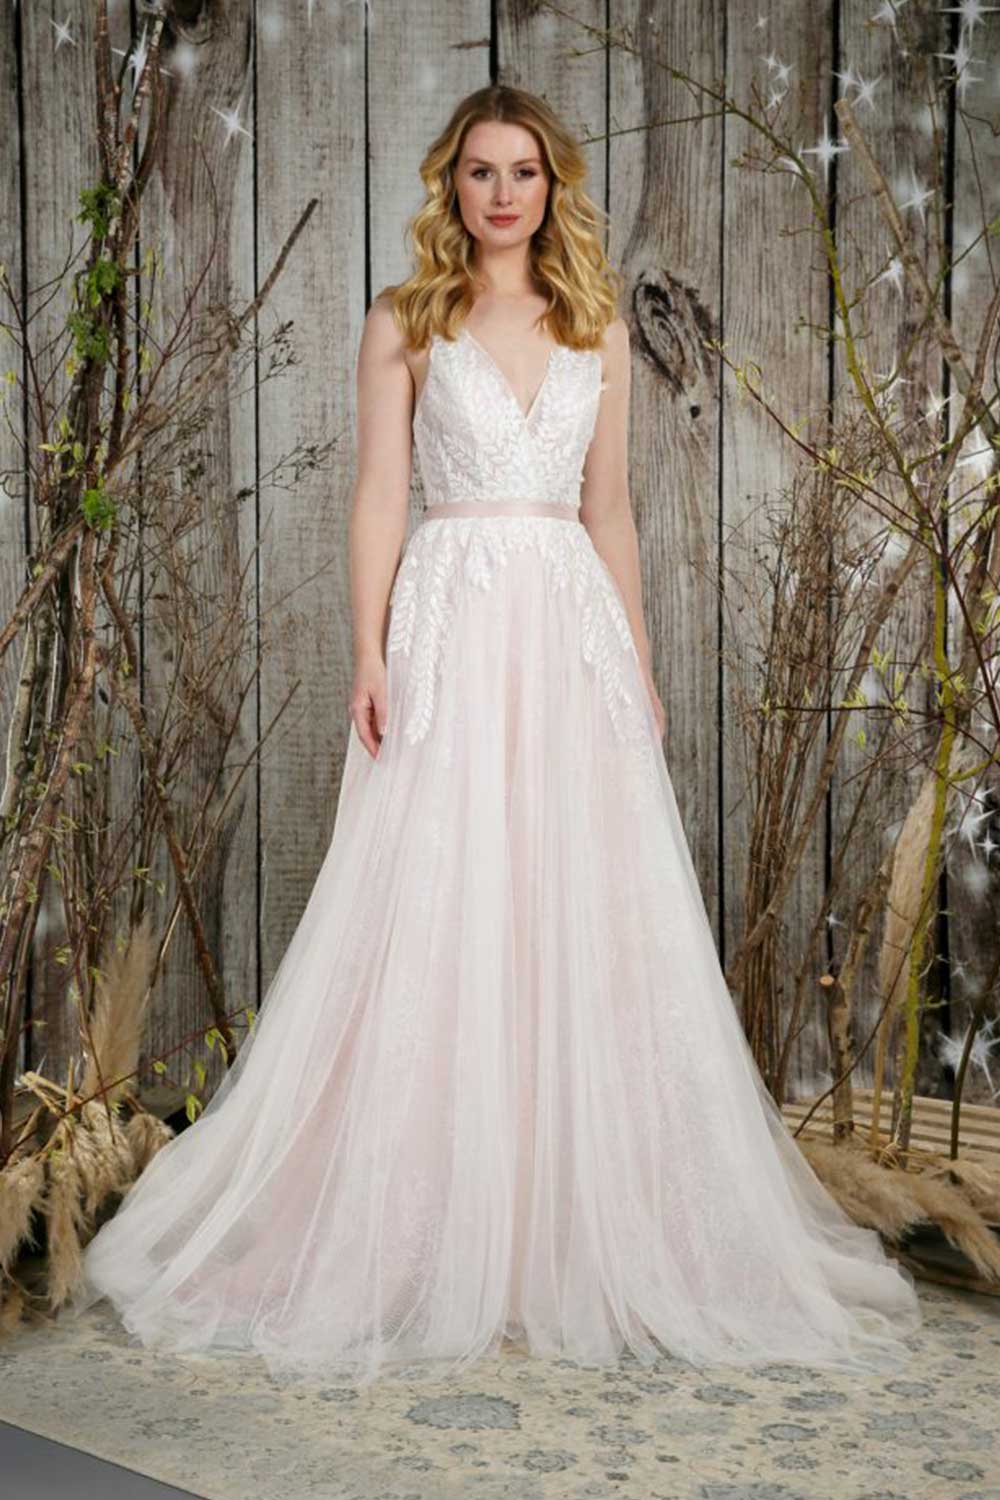 Lace tulle flowing bridal gown